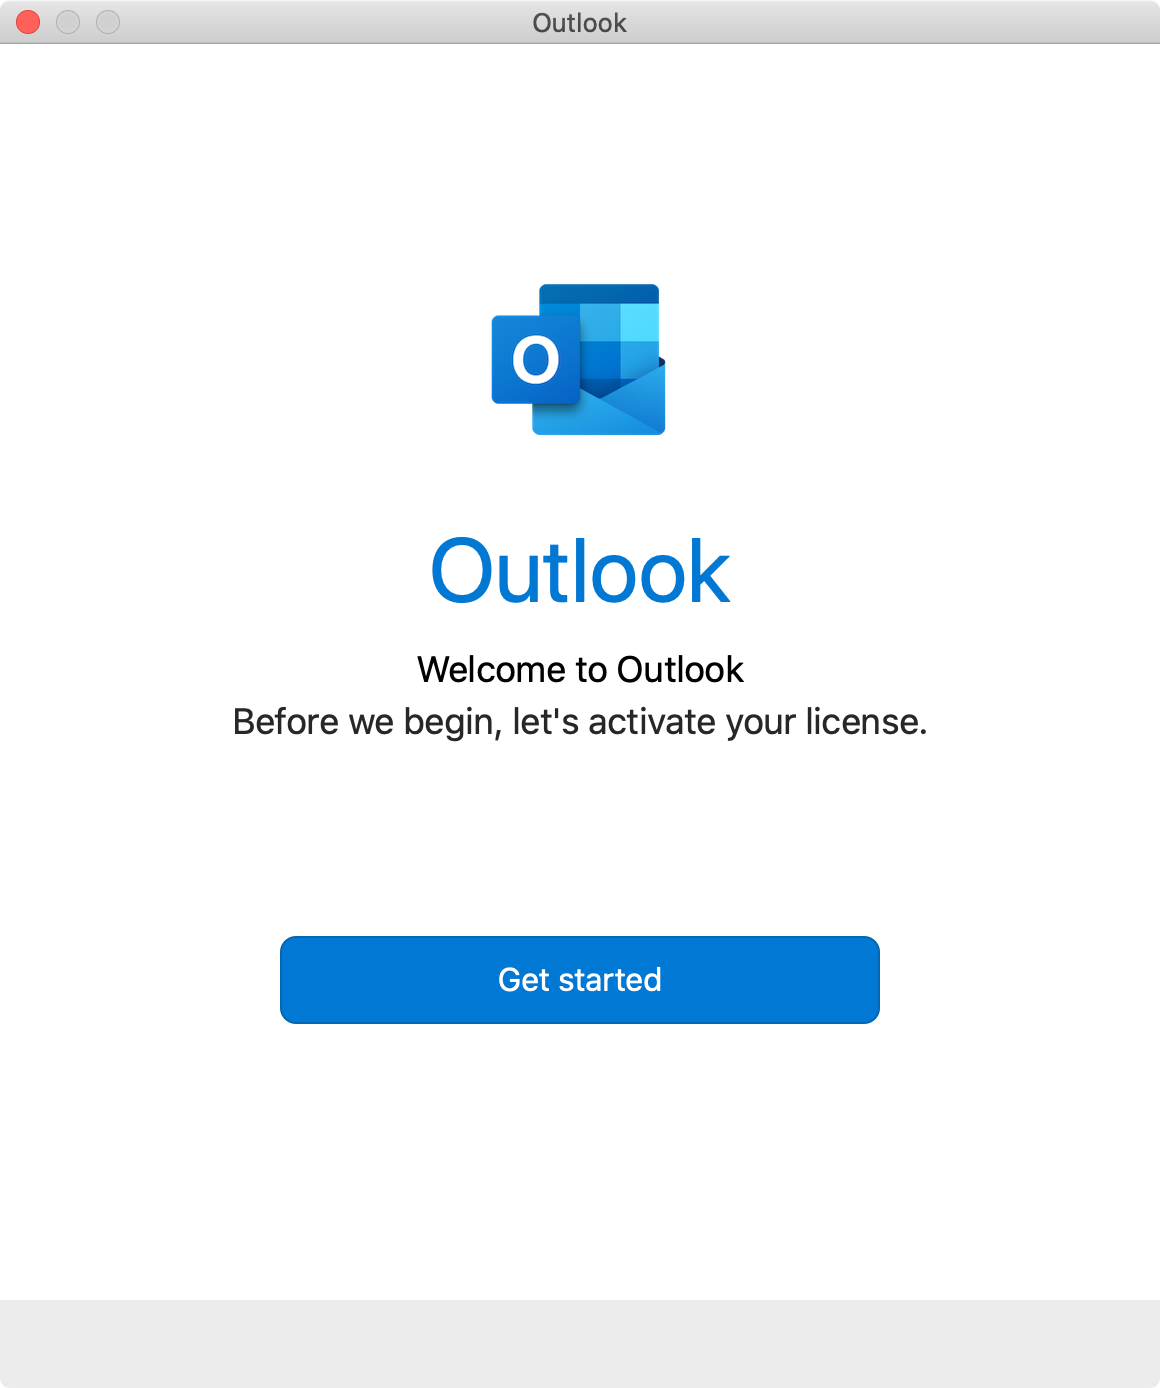 Outlook welcome screen on macOS.